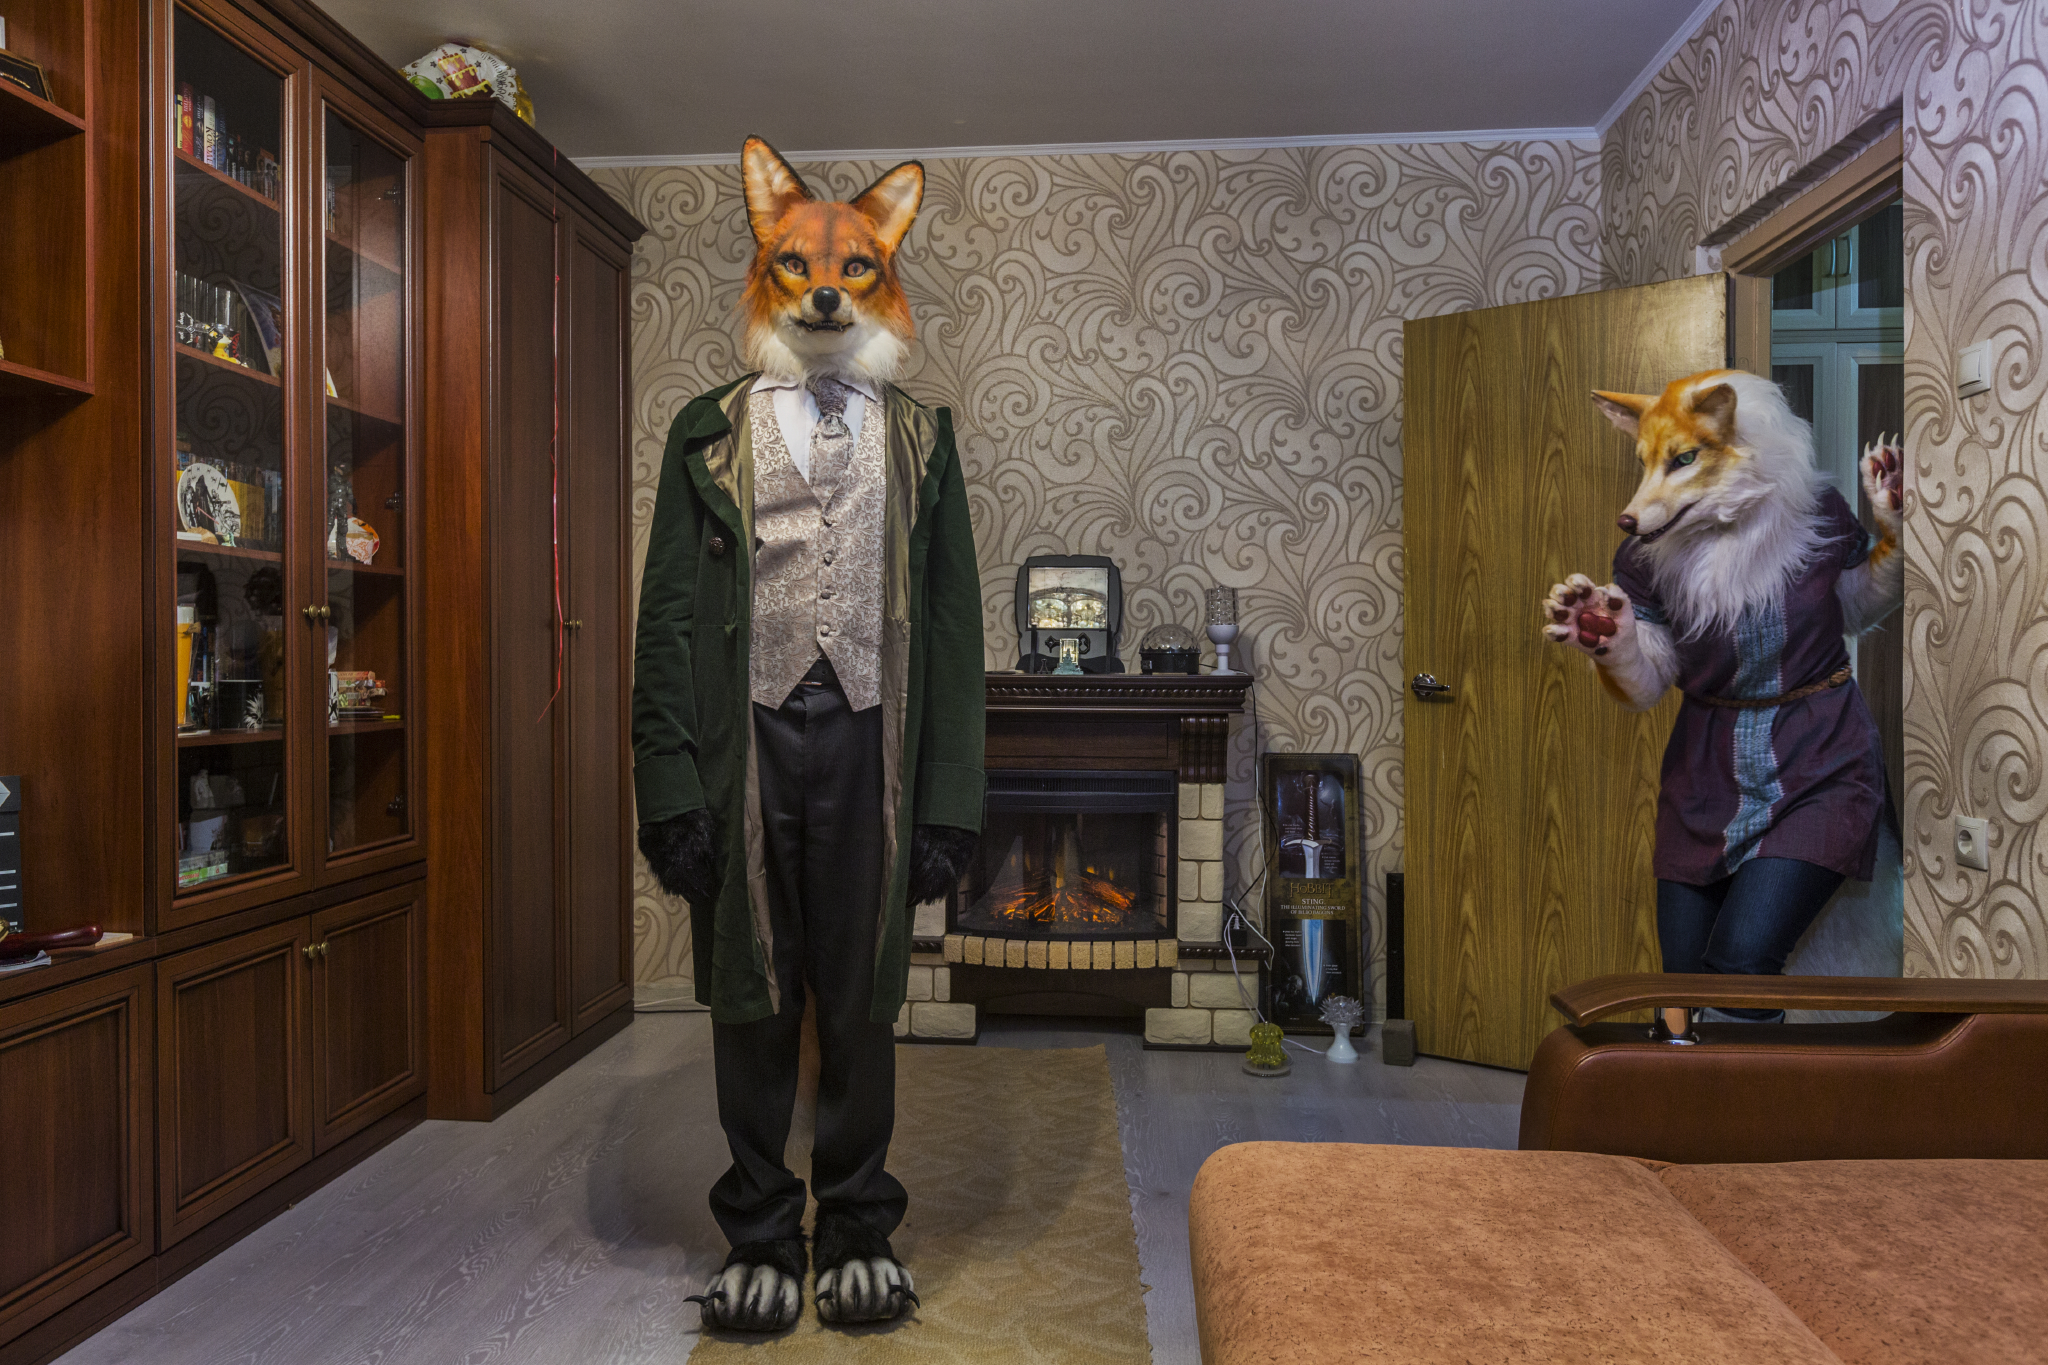  Alexander and Victoria Kylynin escape the everyday through cosplay in their suburban Moscow flat. The 28-year-old banker and 25-year-old interior designer own several animal outfits.  Zelenograd, Russia  